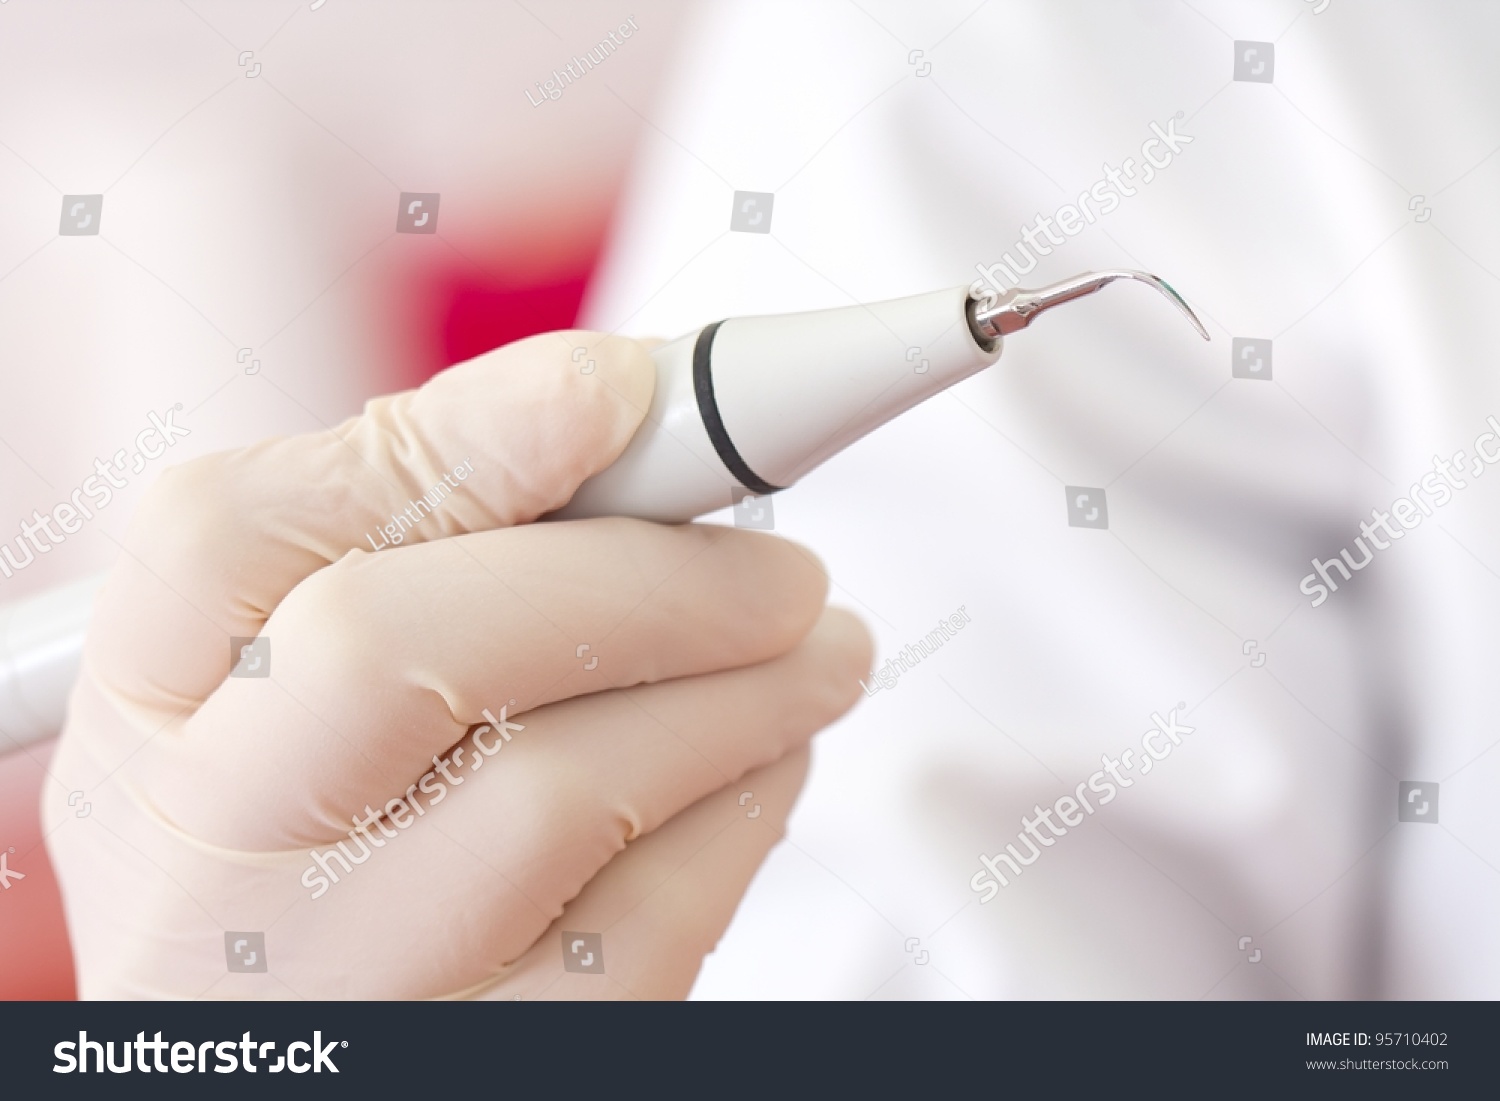 Periodontal ultrasonic scalers are dental instruments used primarily in the prophylactic and periodontal care of human teeth - tartar removal. #95710402